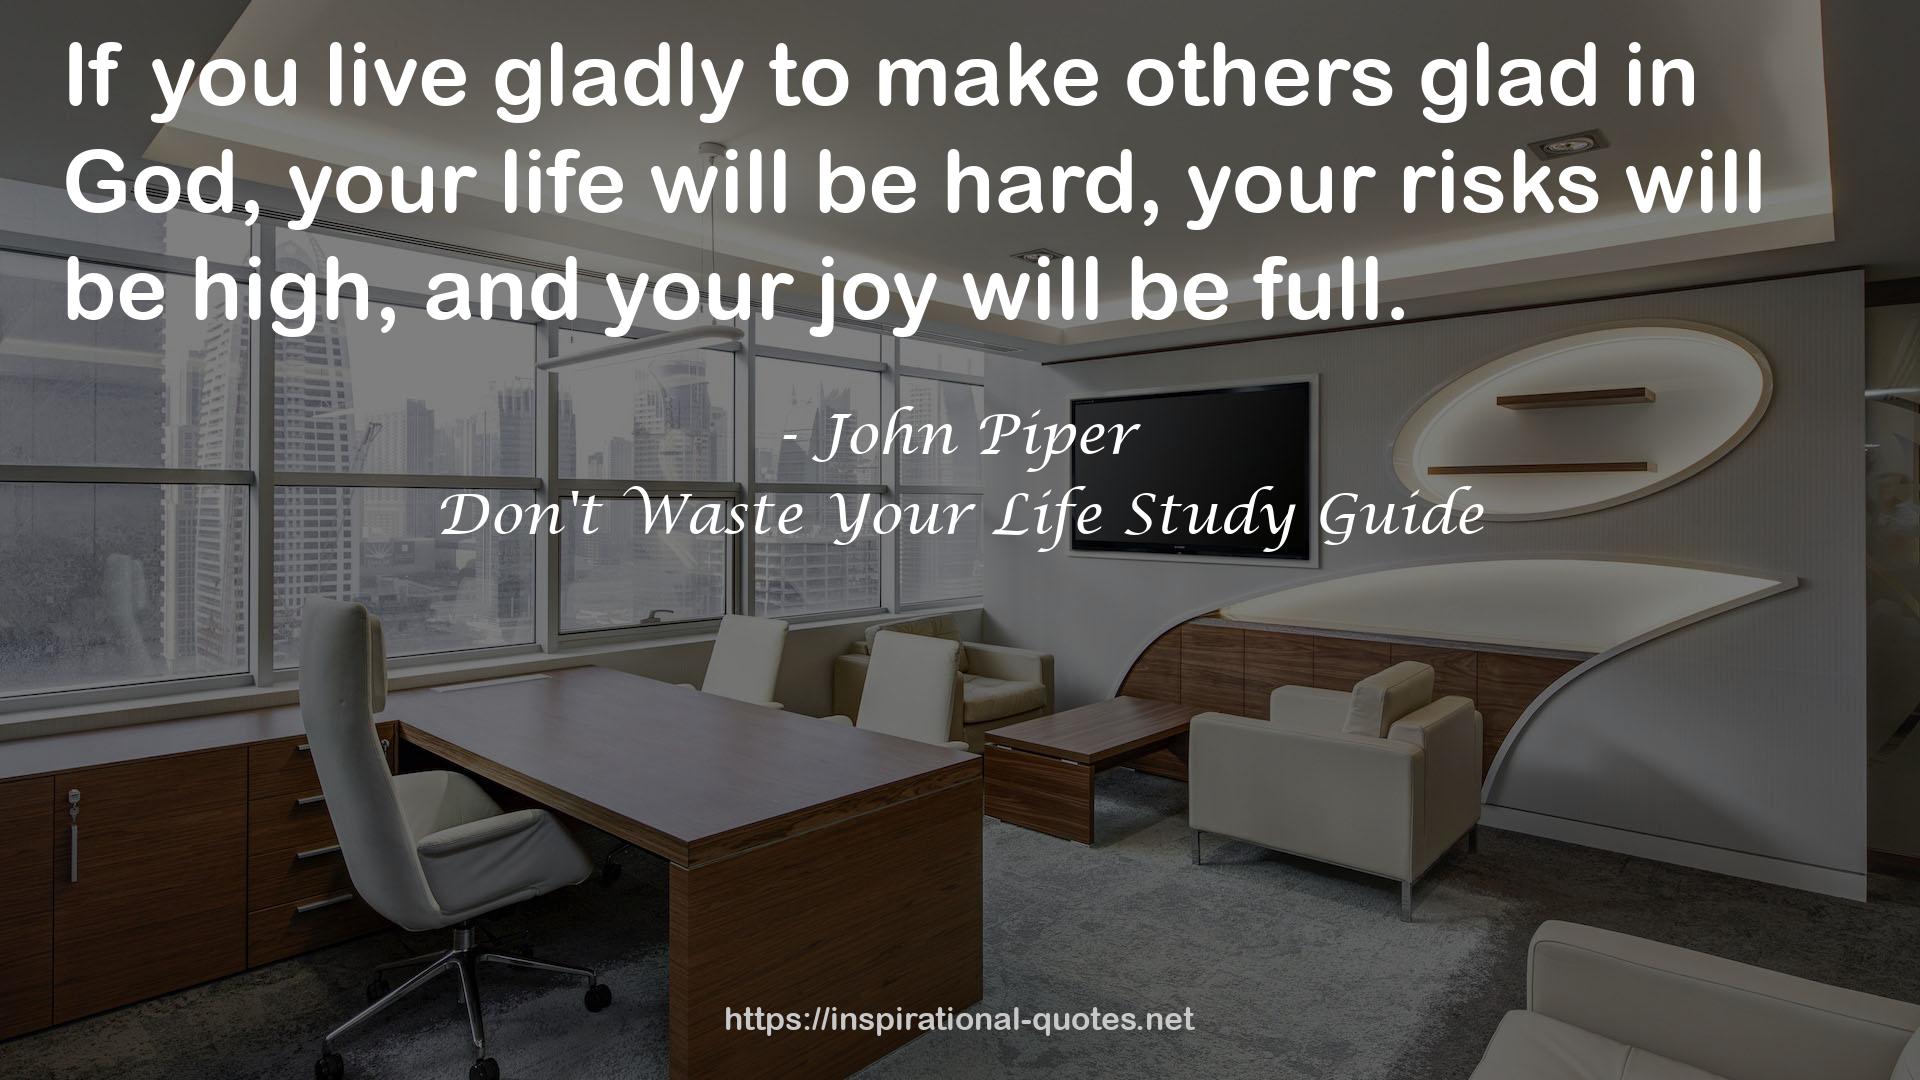 Don't Waste Your Life Study Guide QUOTES